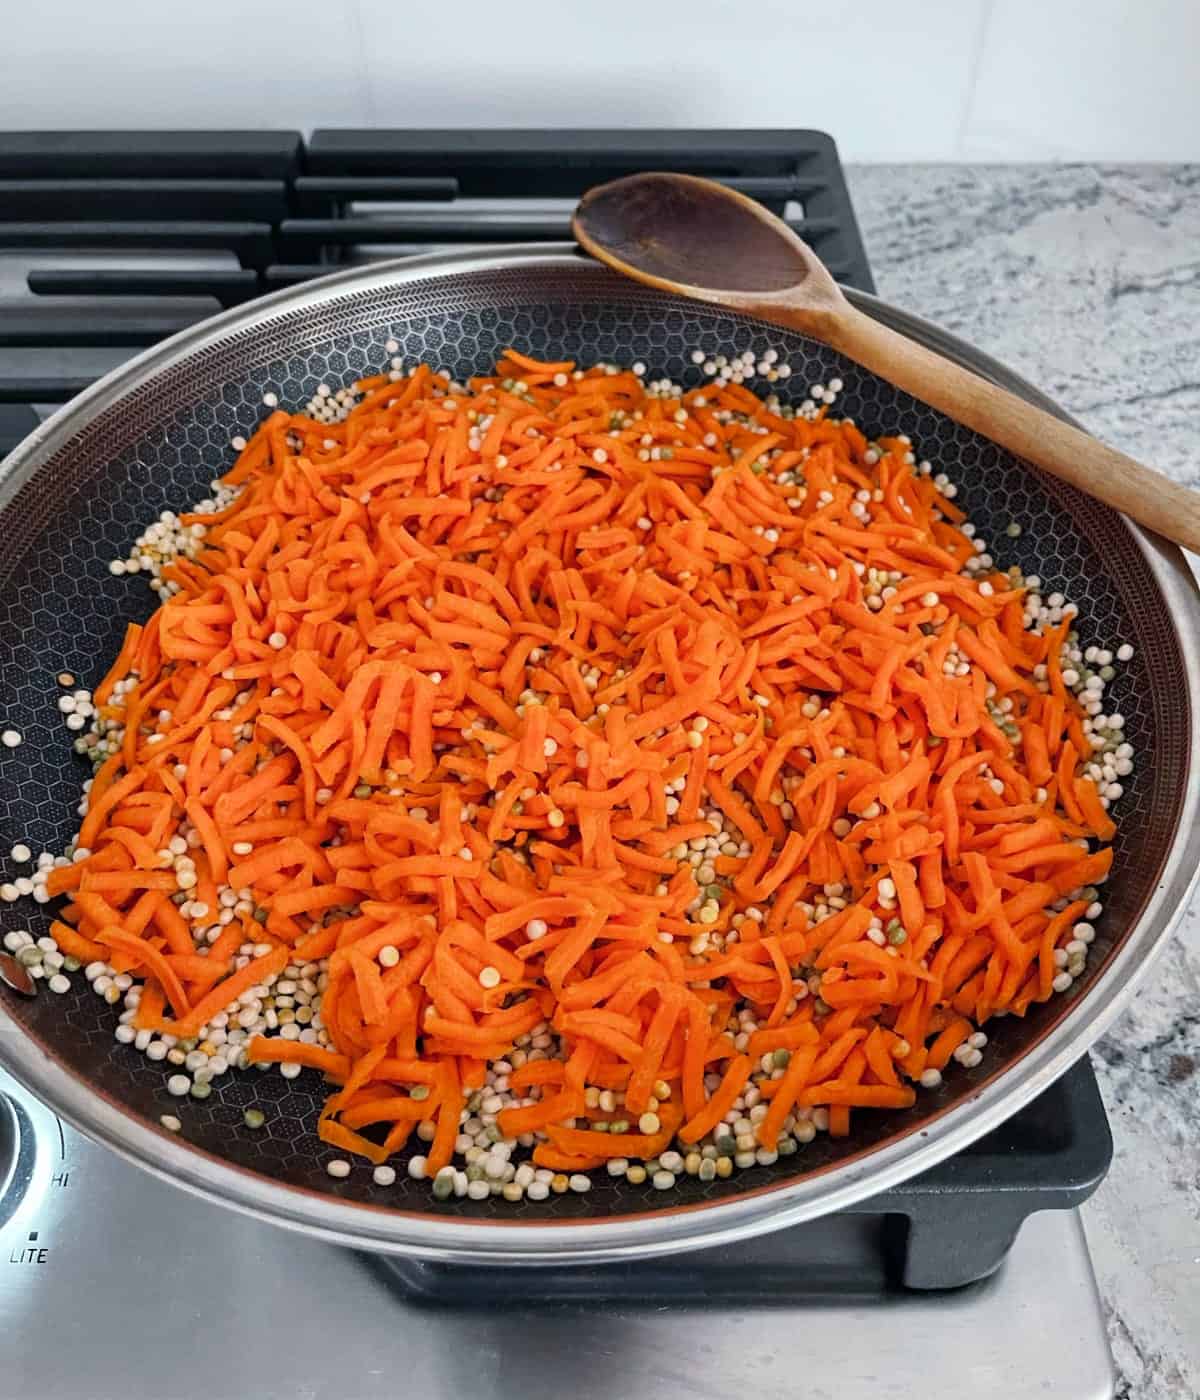 Sauteing shredded carrots and Israeli couscous in skillet.